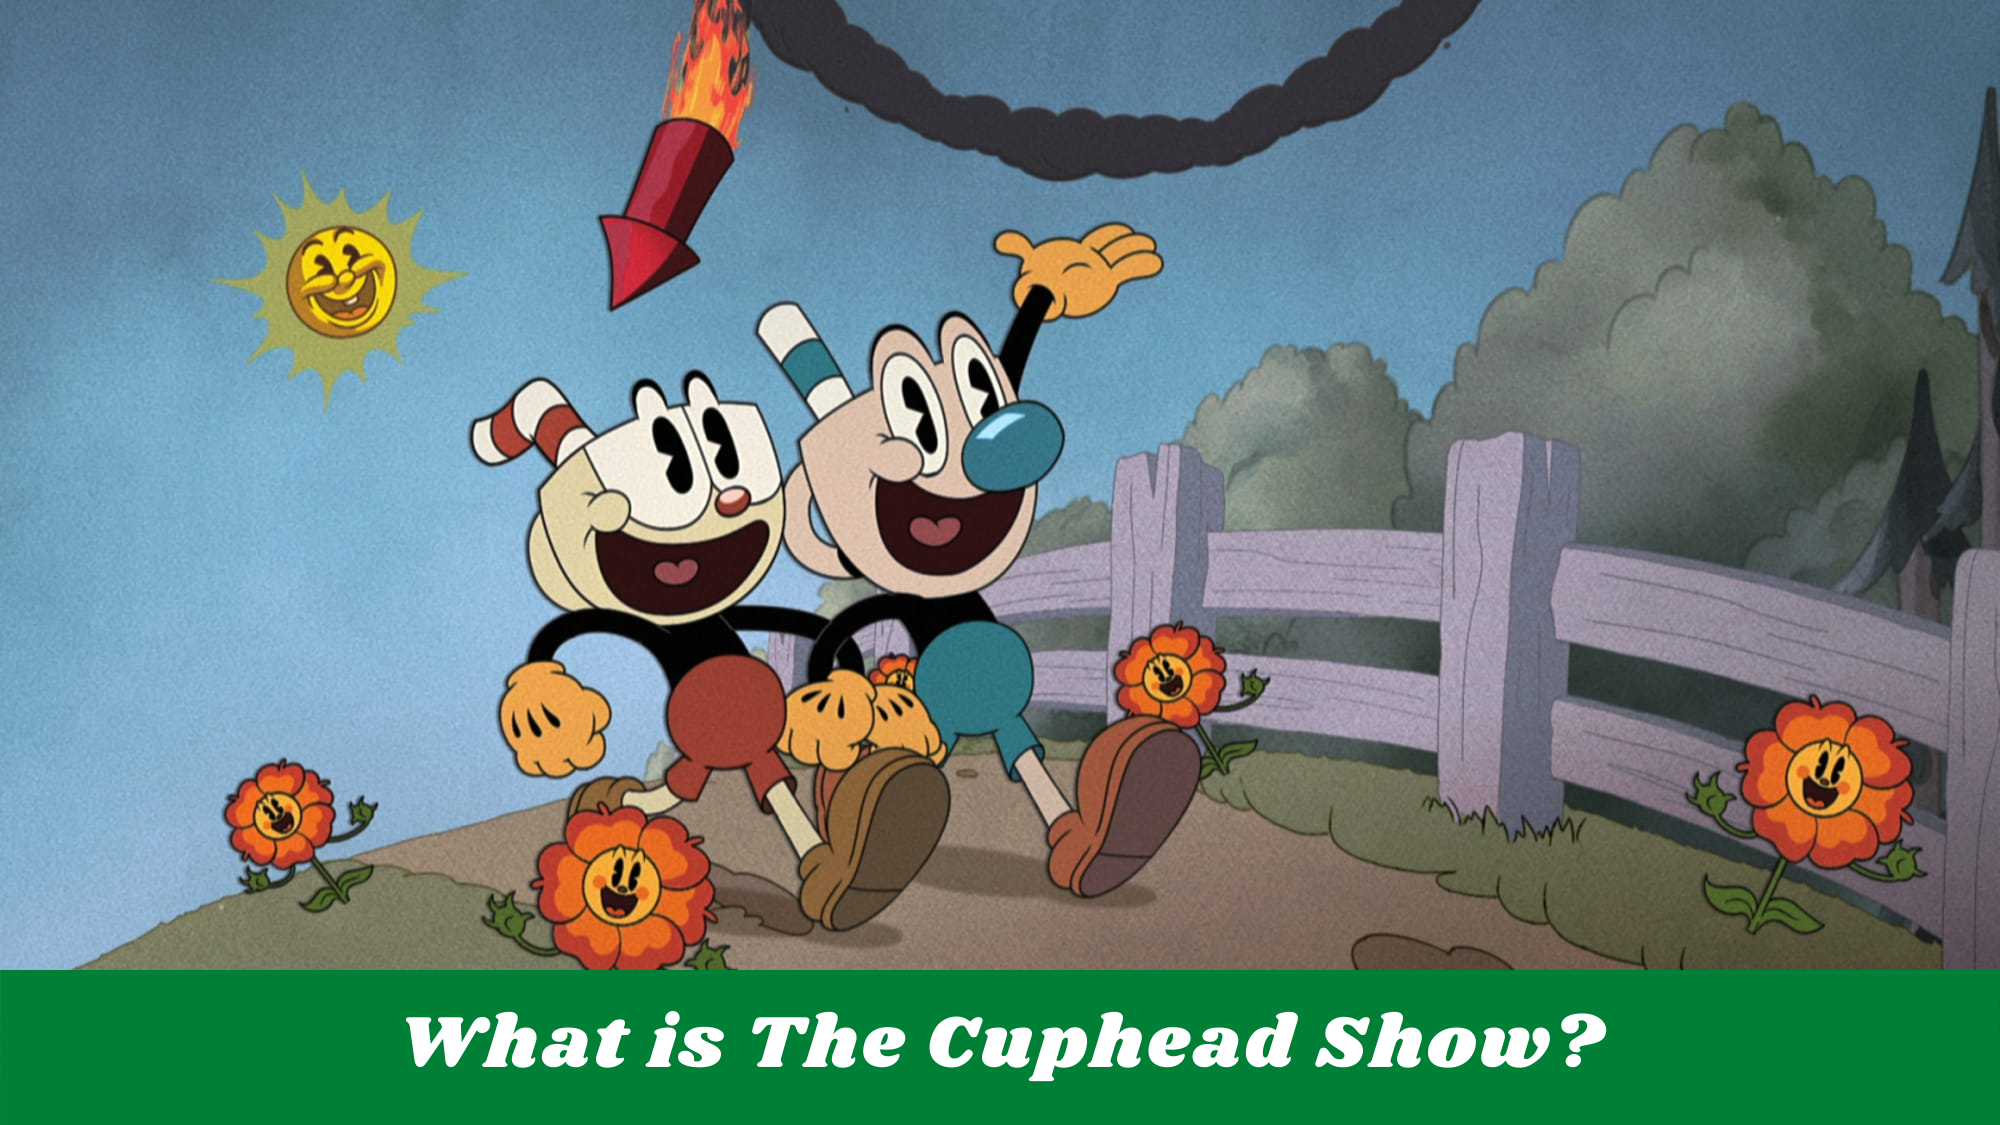 What is The Cuphead Show?